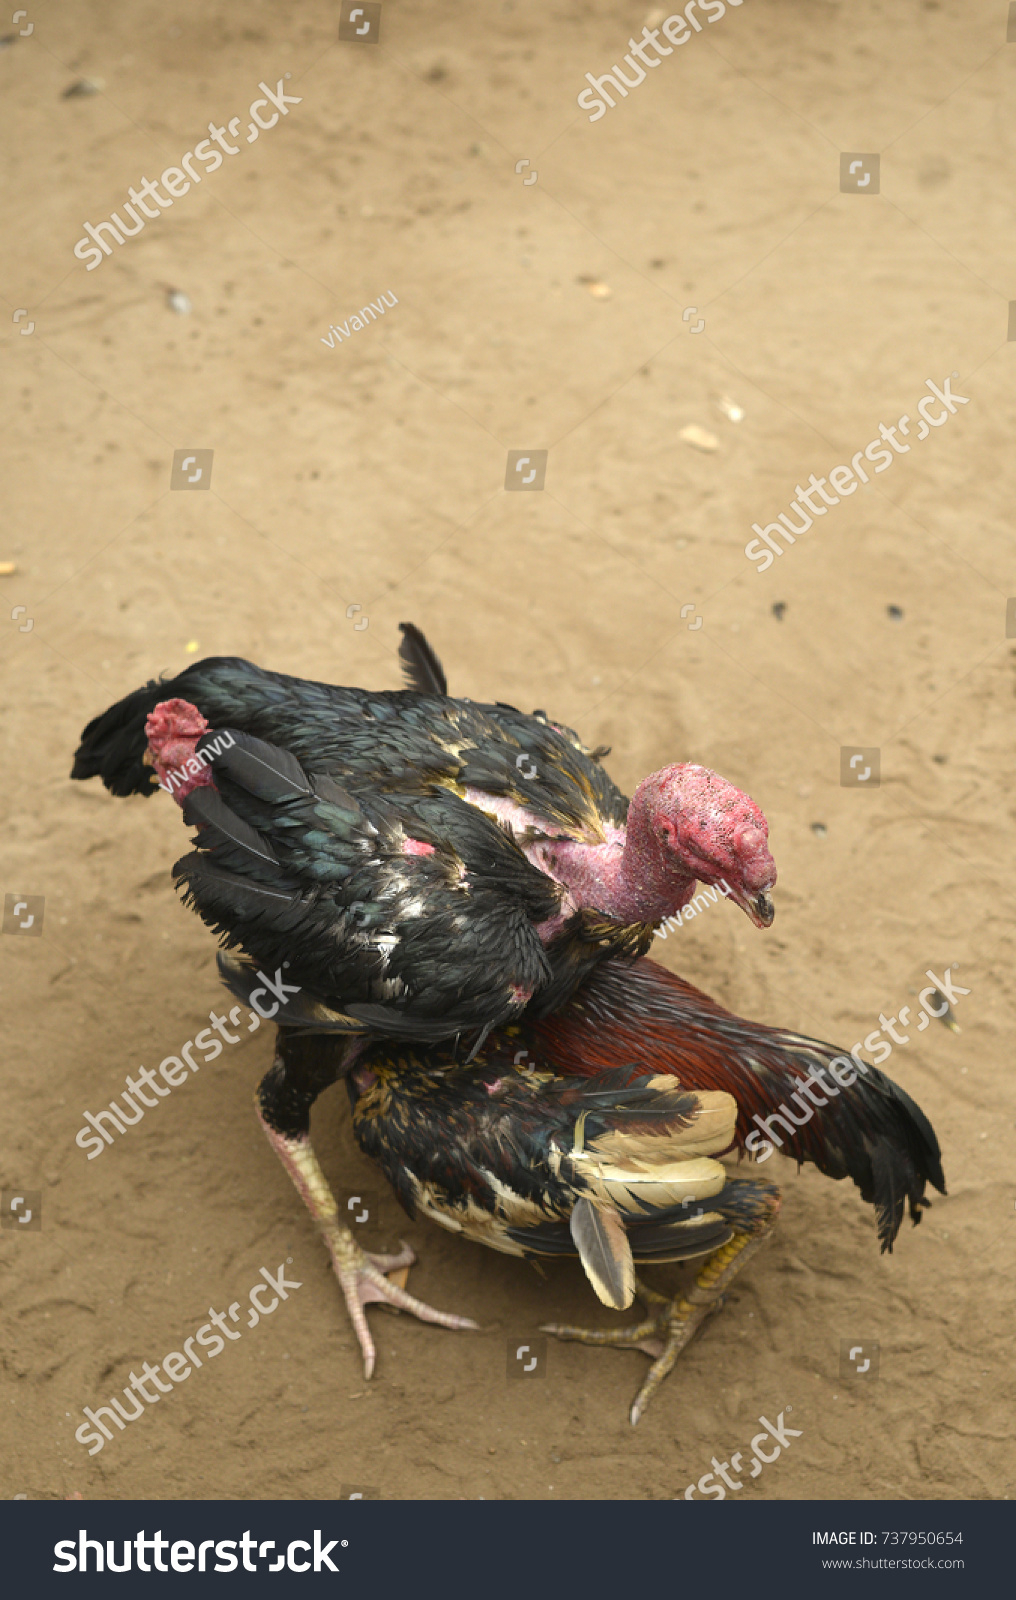 Two Cocks Fight Cockfights Often Staged Stock Photo (Edit for Lunar Calendar Cockfighting 2020